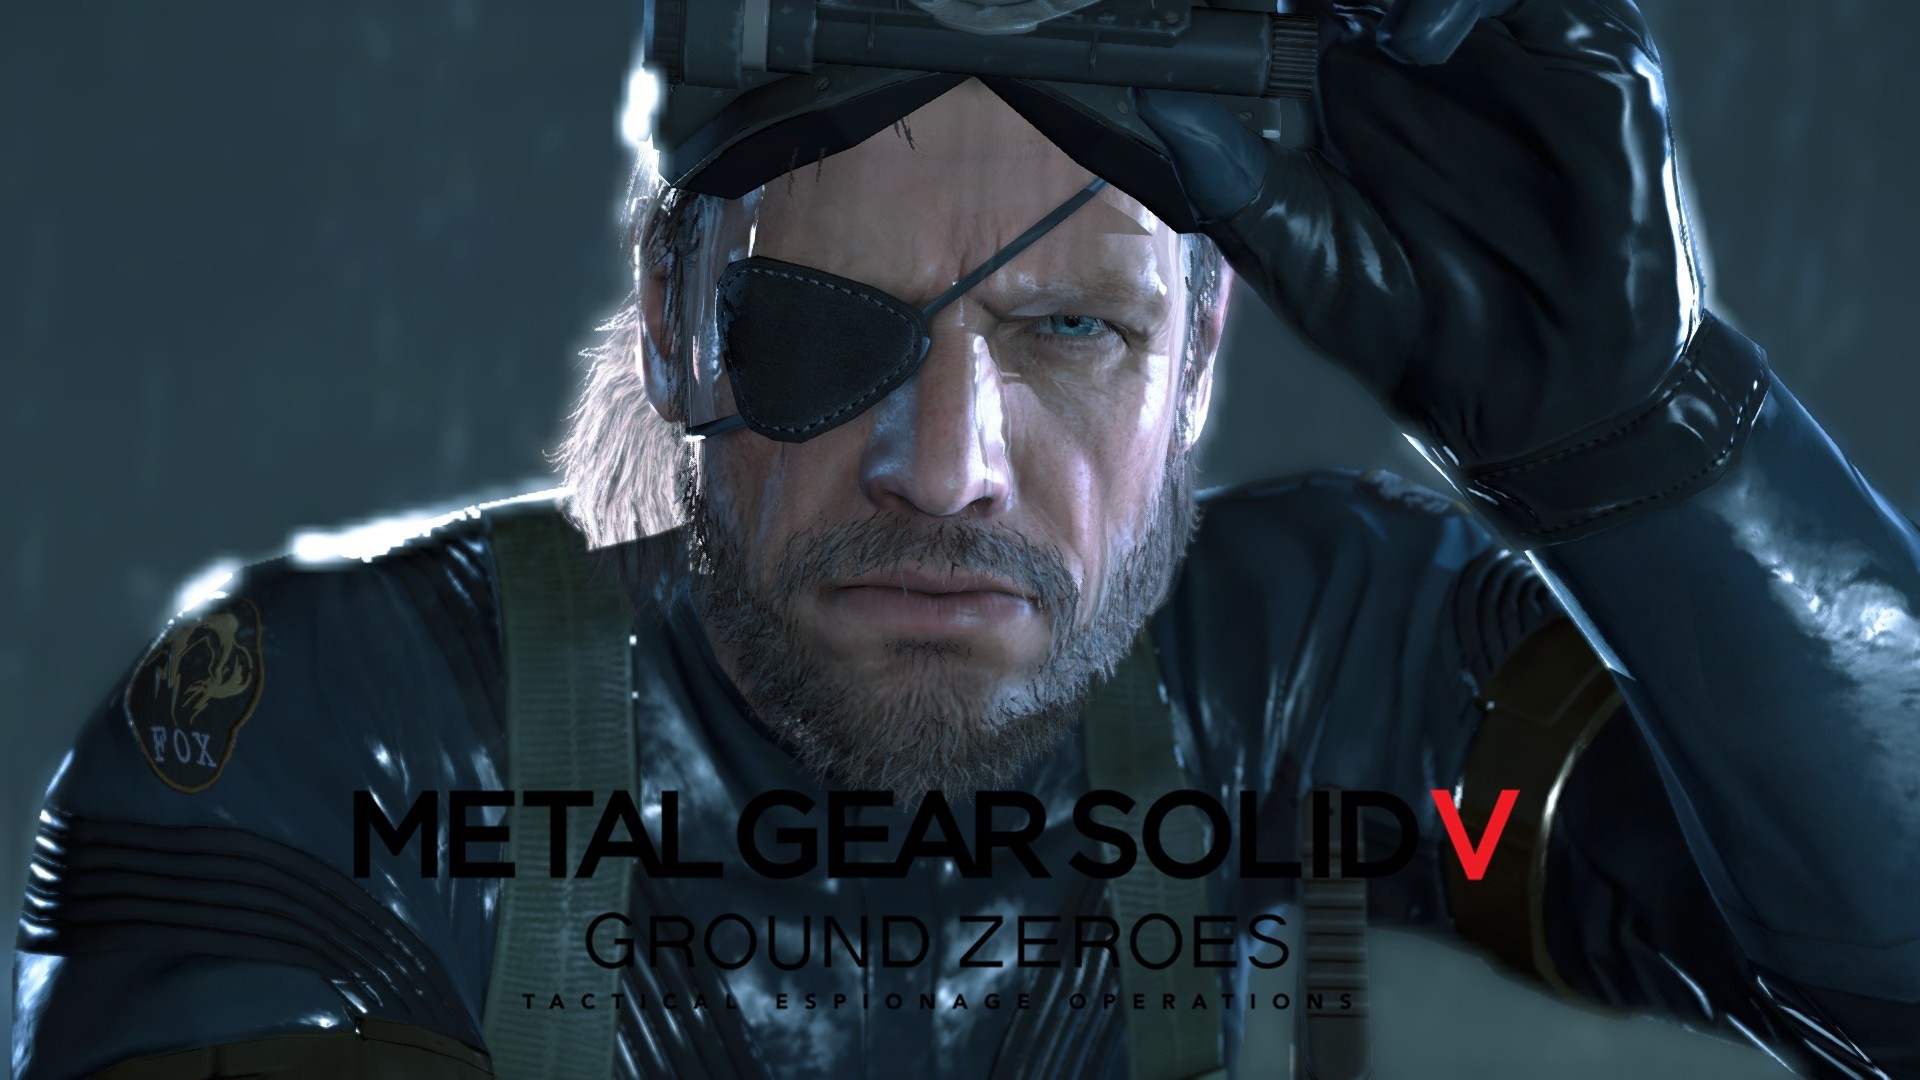 Metal Gear Solid V Ground Zeroes Big Boss Wallpapers Hd Desktop And Mobile Backgrounds